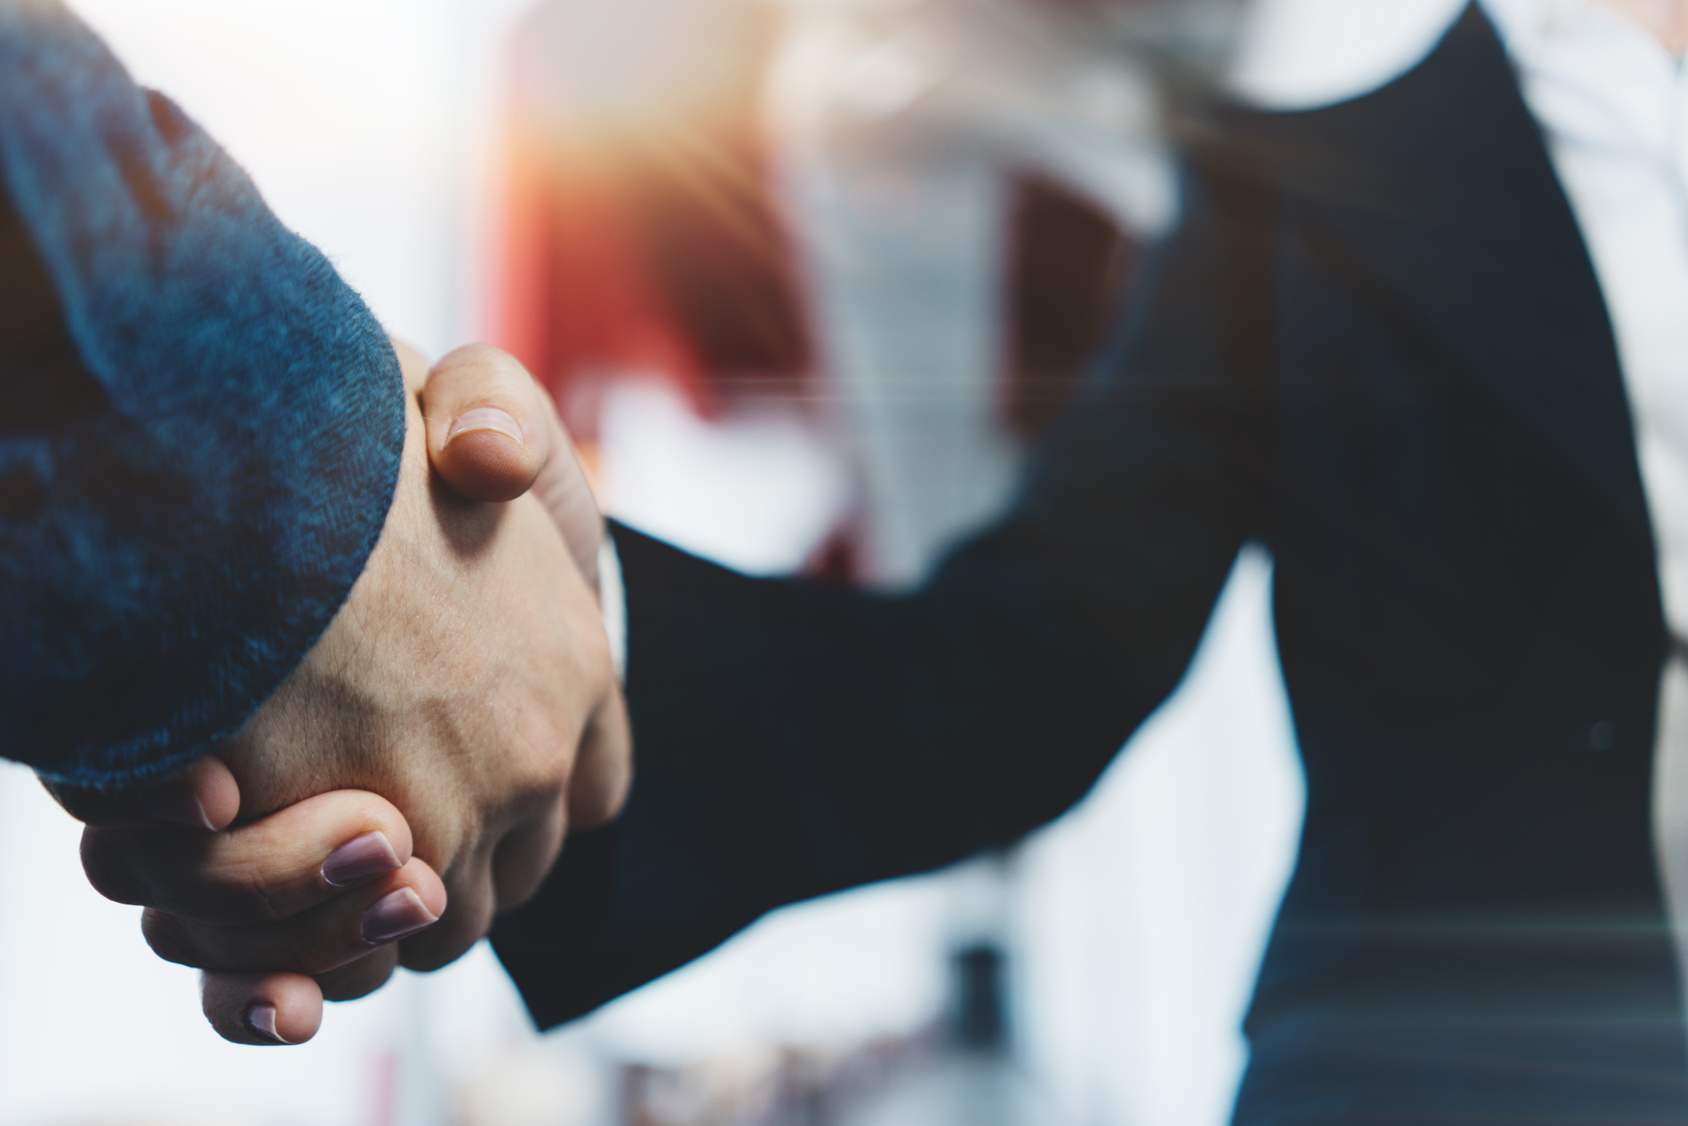 Business people shake hands in office after successful deal and partnership